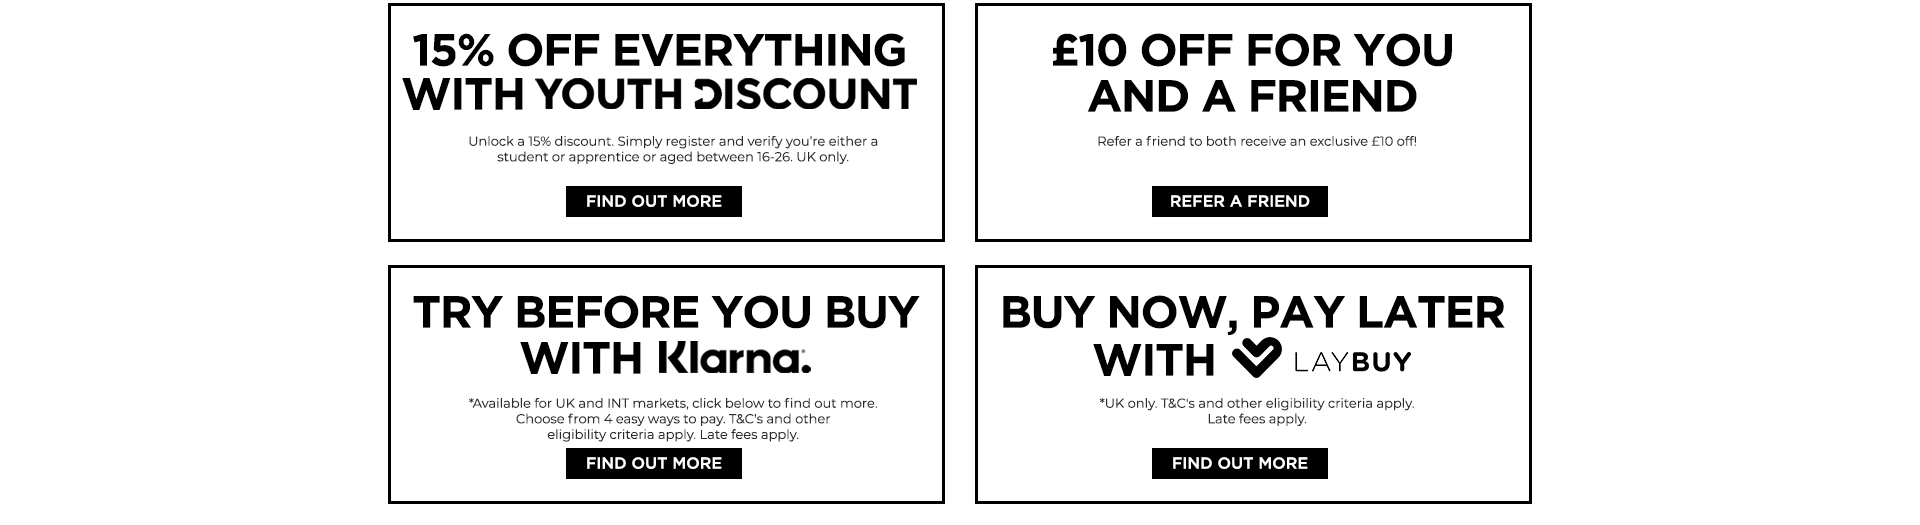 Long Tall Sally Discount Codes & Vouchers Up To 70 Off Long Tall Sally